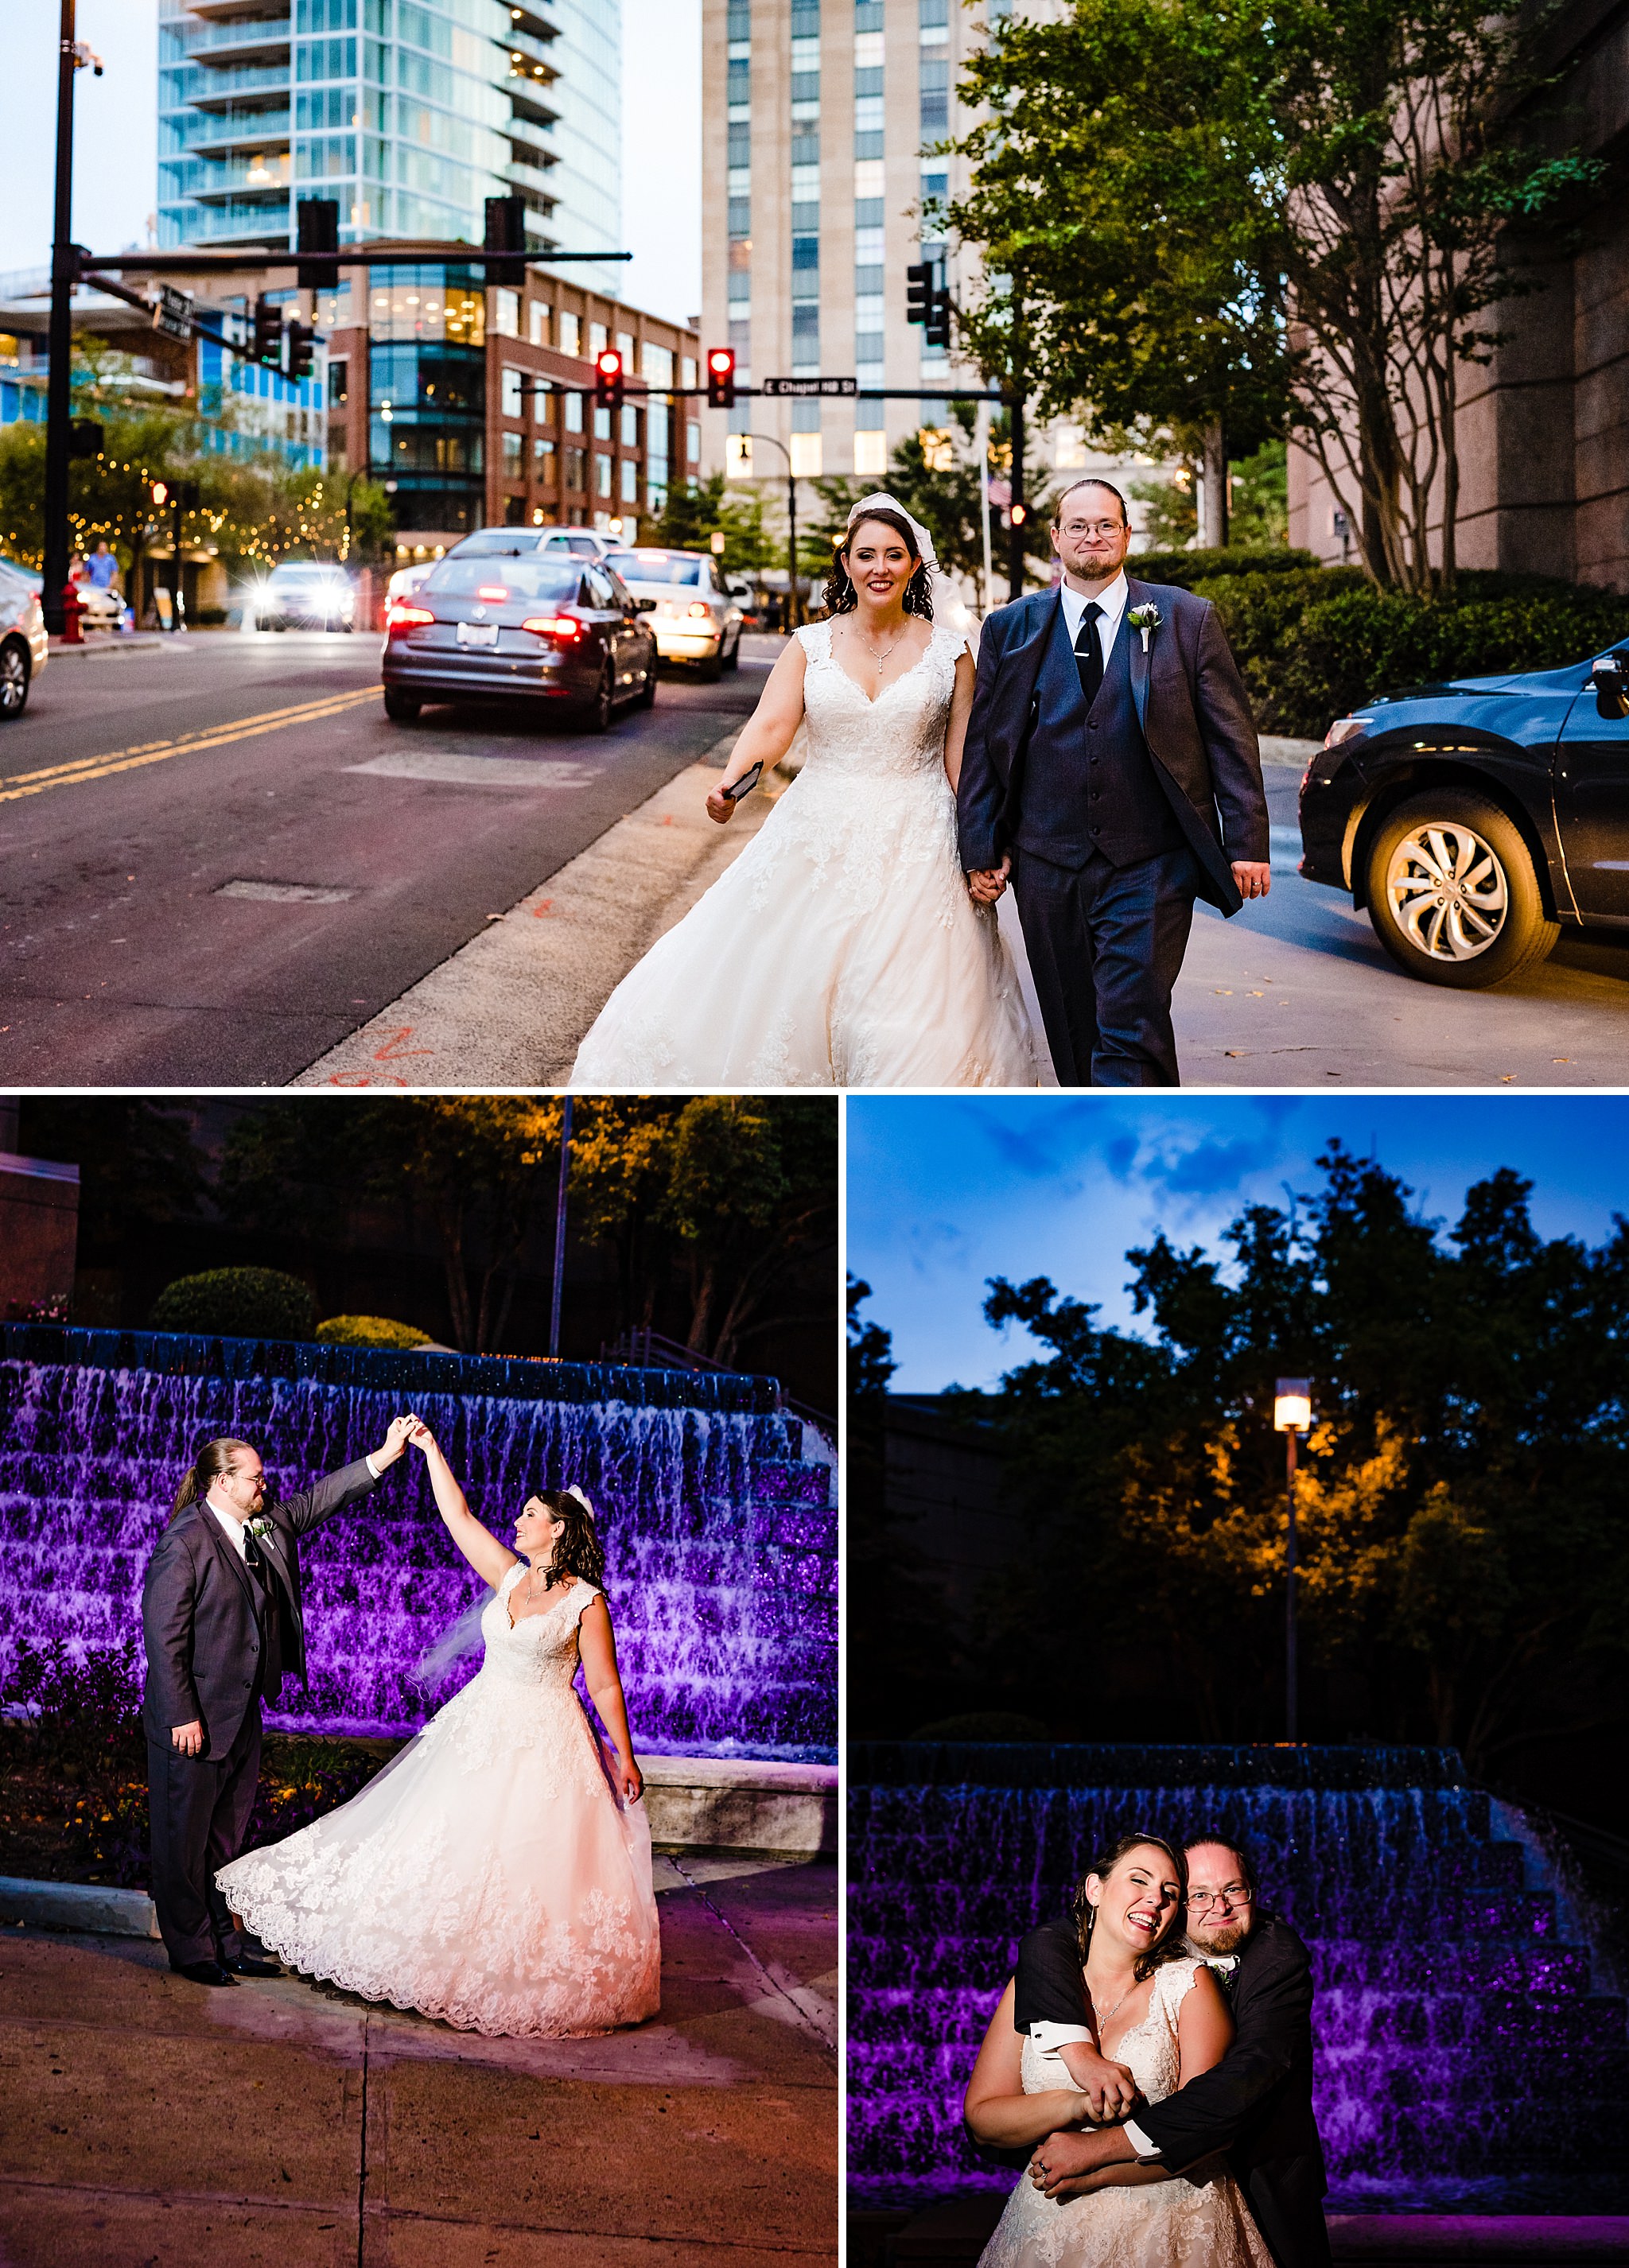 Portraits of a bride and groom in downtown Durham, taken by Raleigh wedding photographers during their Durham Armory wedding